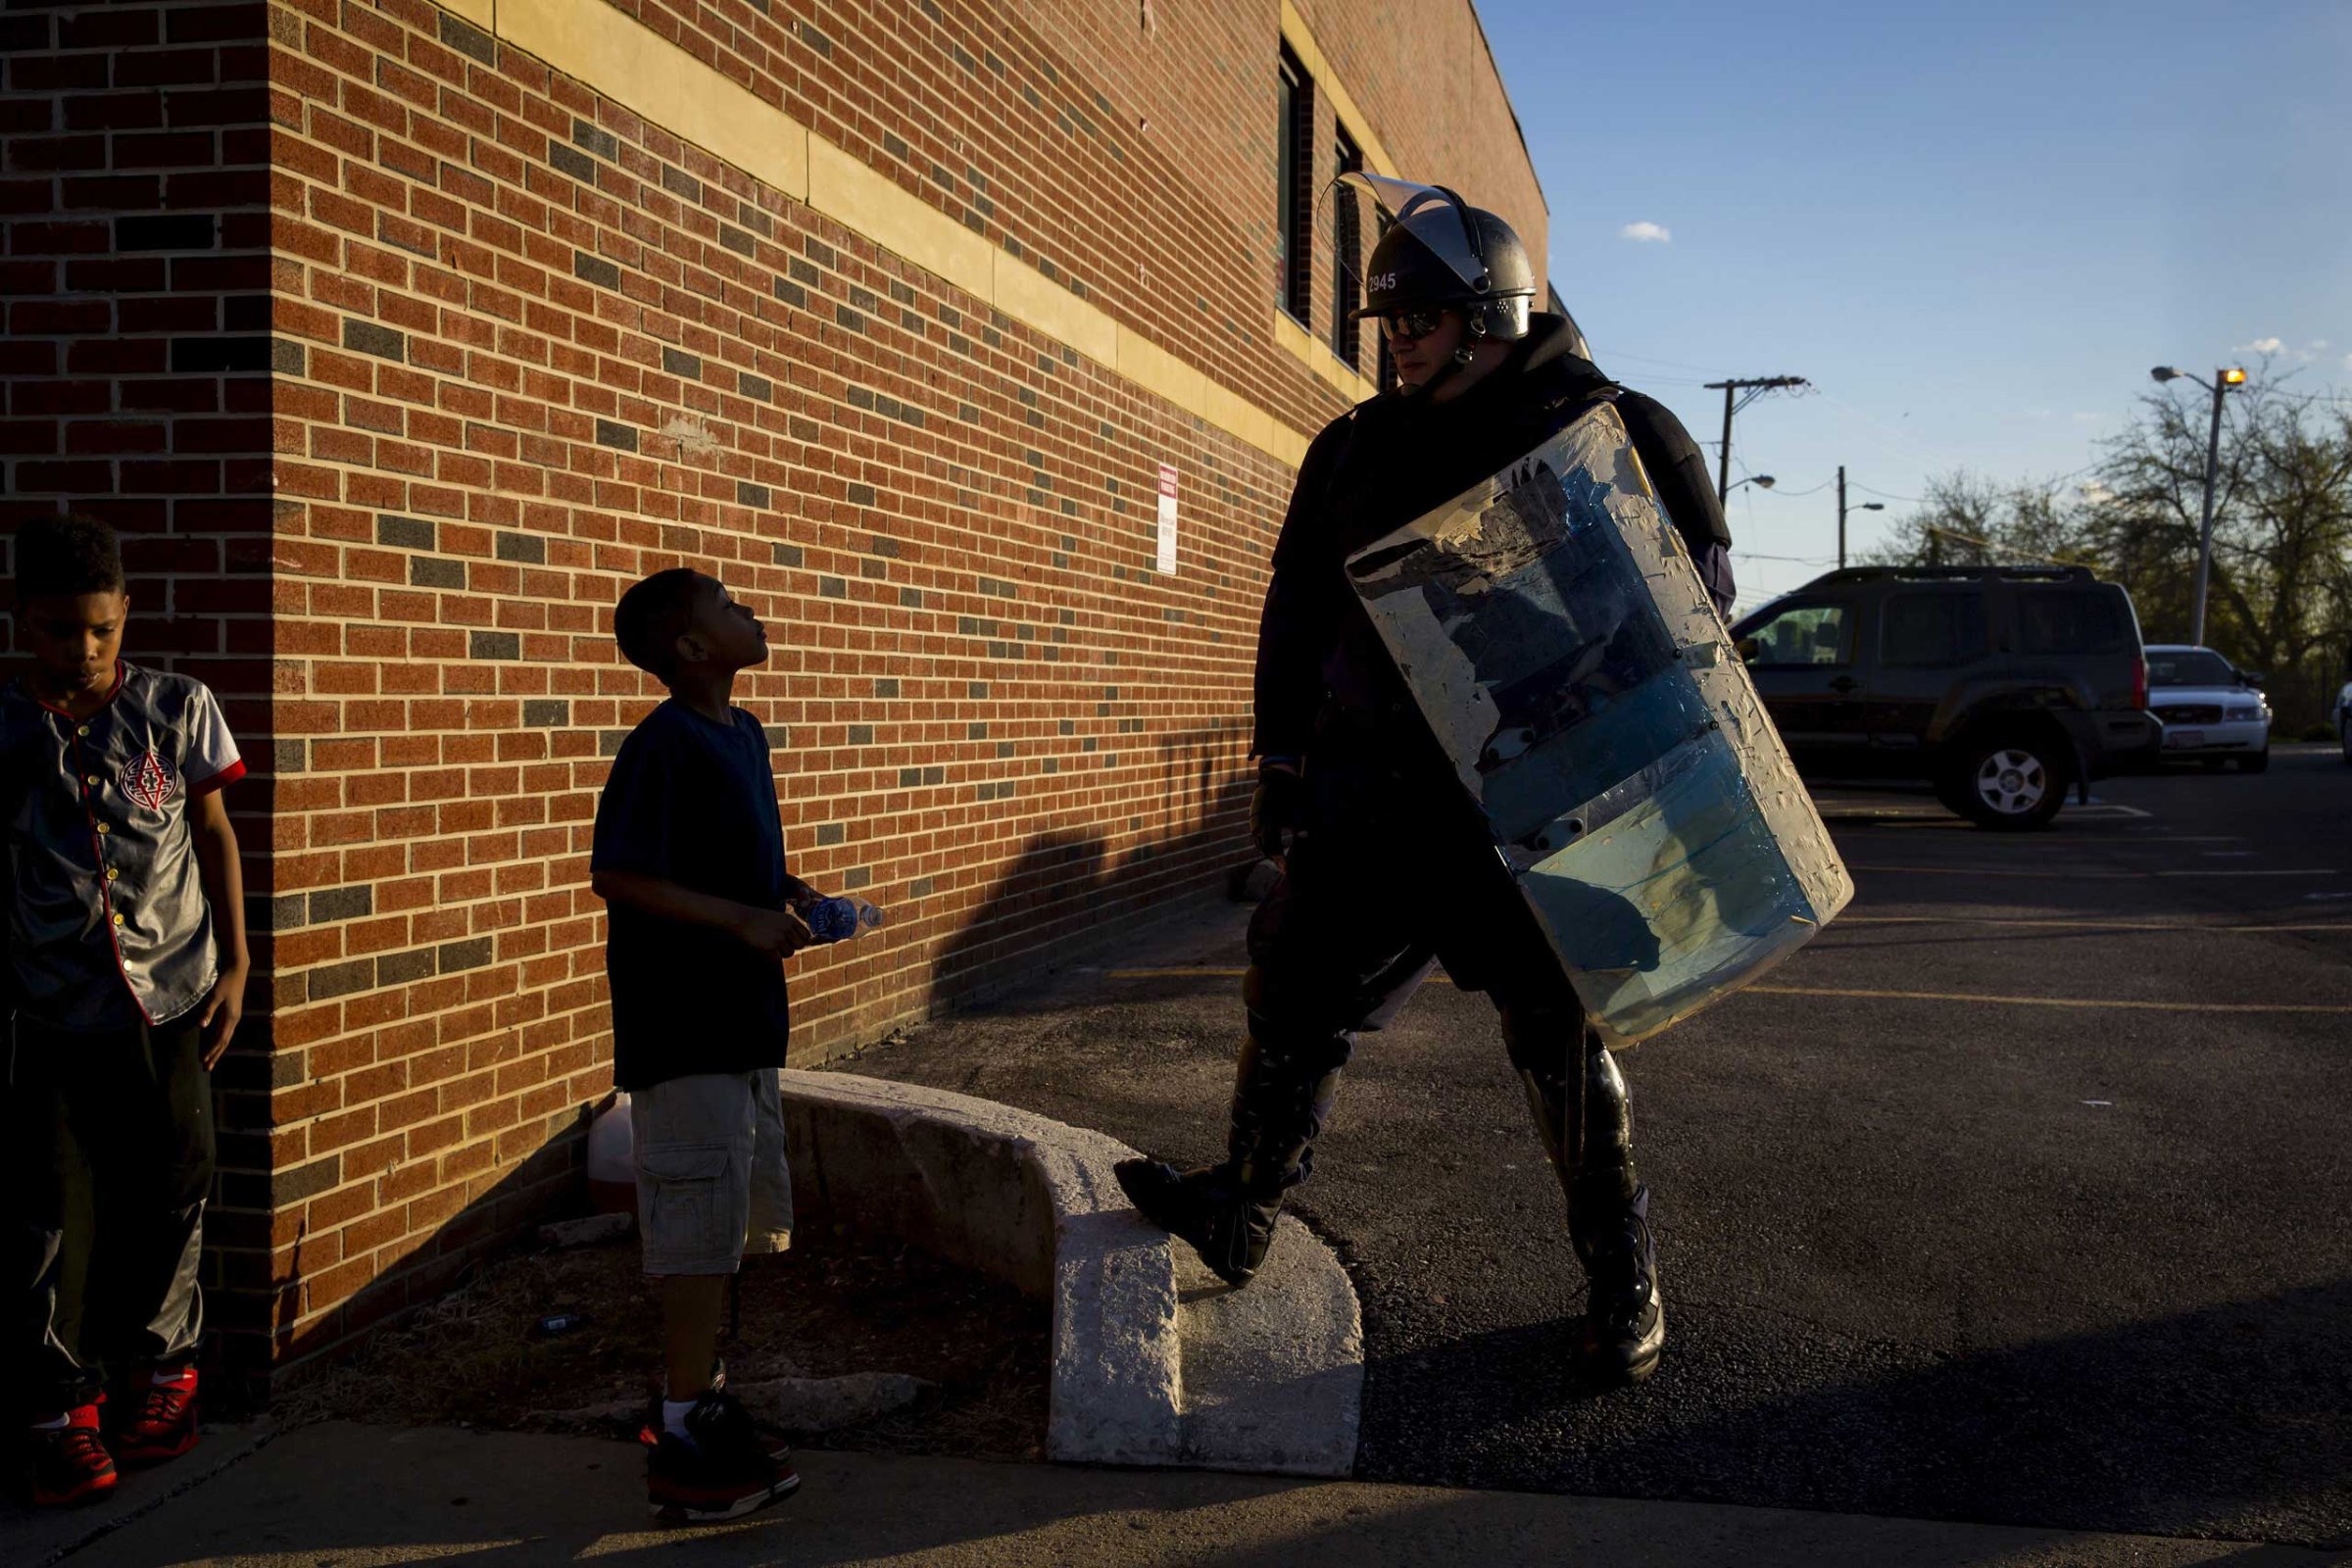 A boy talks to a police officer near North Ave and Pennsylvania Ave in Baltimore on April 28, 2015